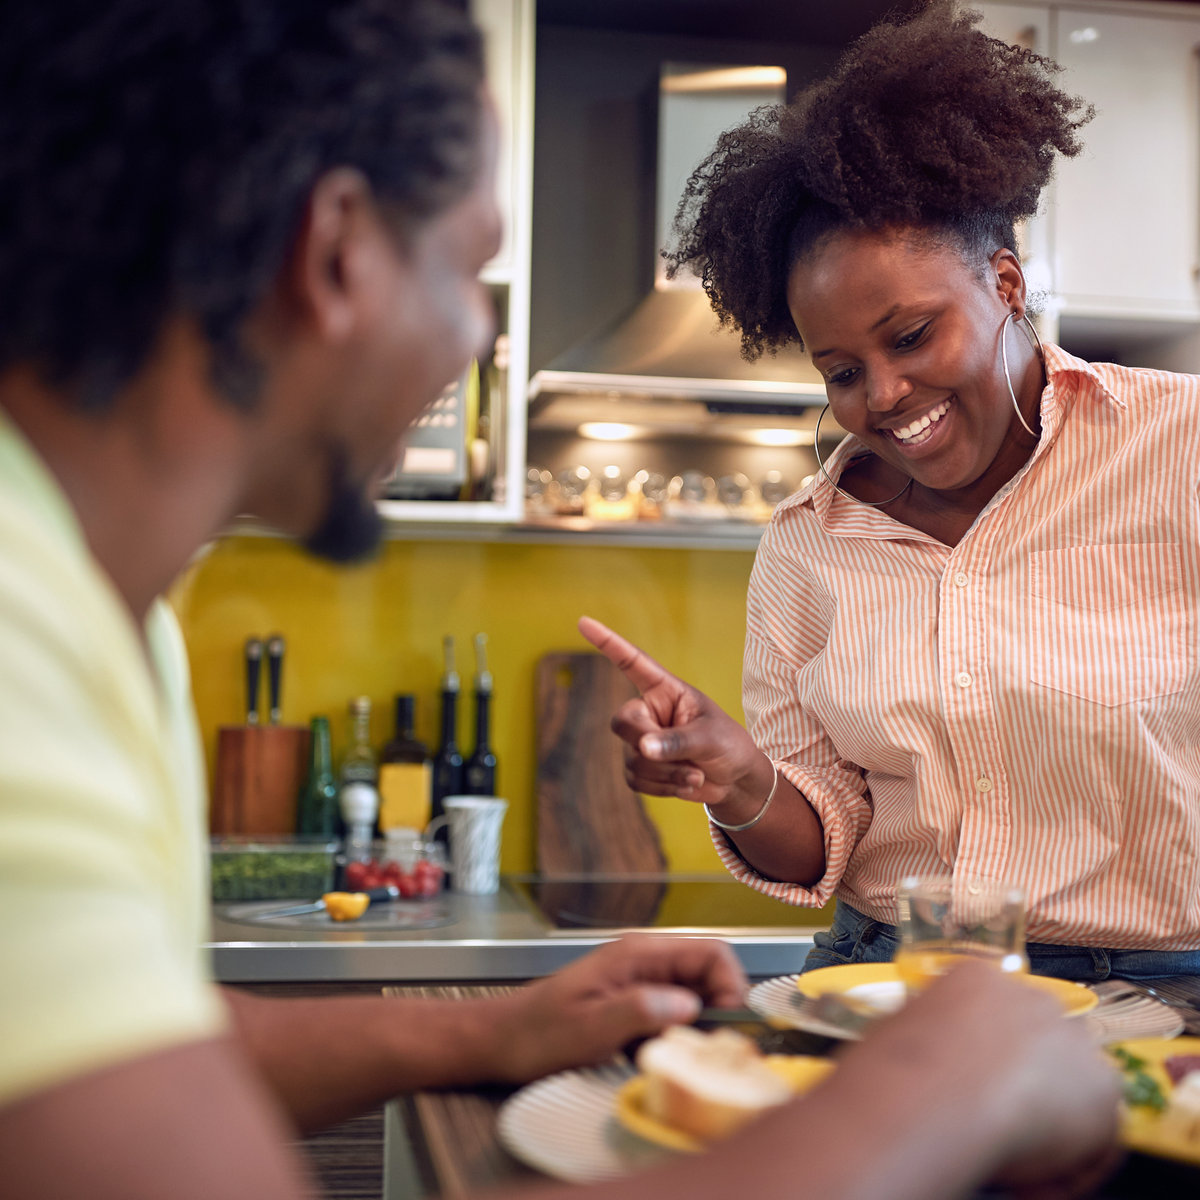 Couple dining connection as part of meals for high blood pressure. https://www.info-on-high-blood-pressure.com/meals-for-high-blood-pressure.html